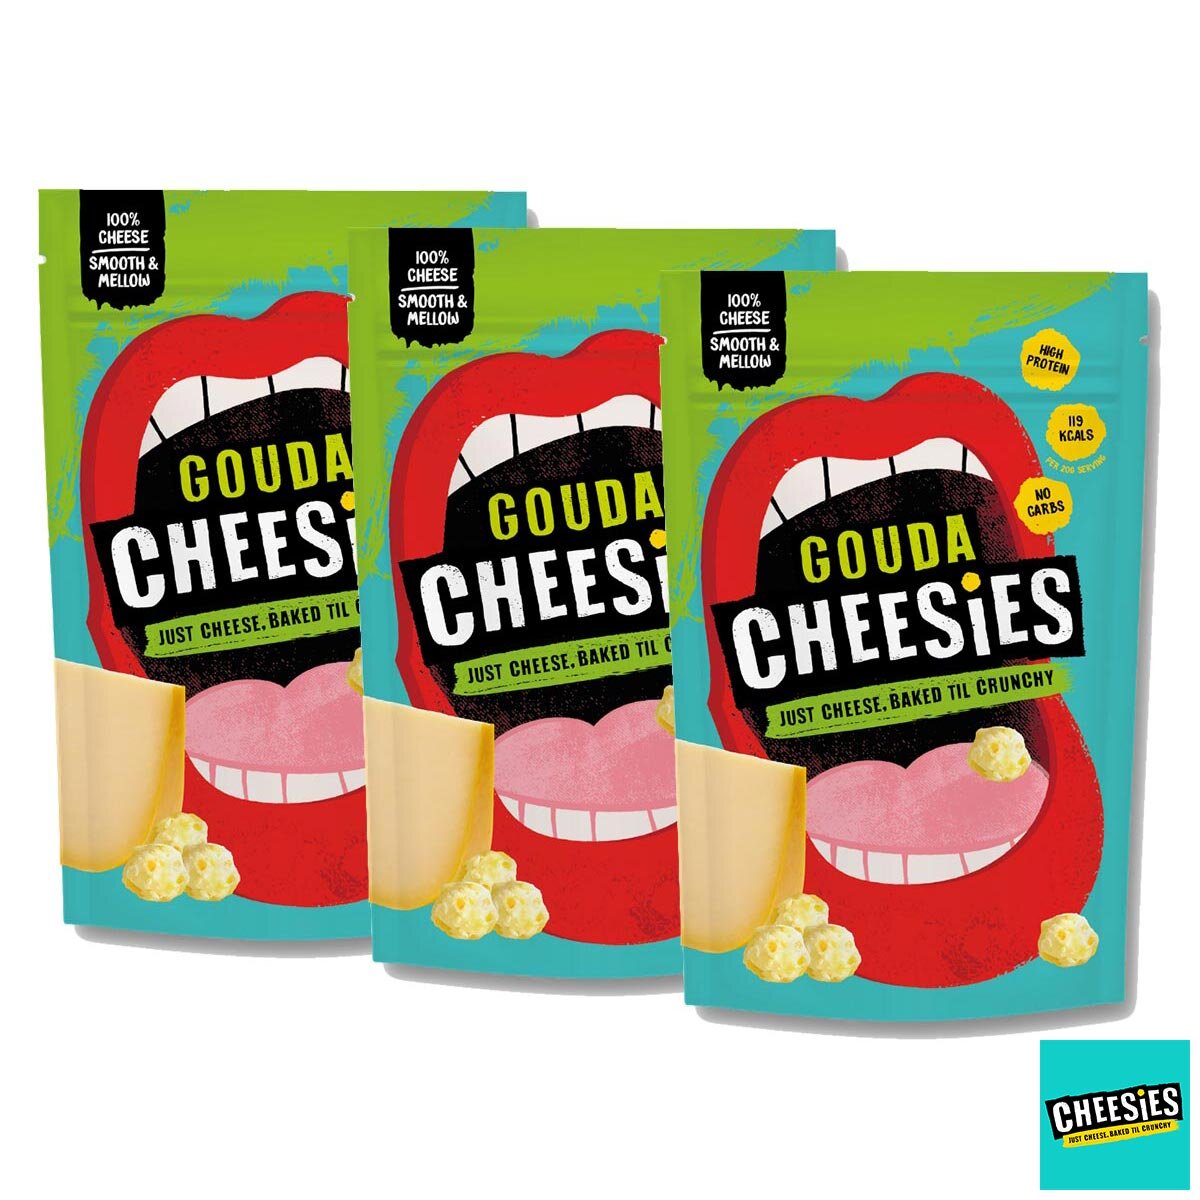 Cut out image of cheesies packs on white background